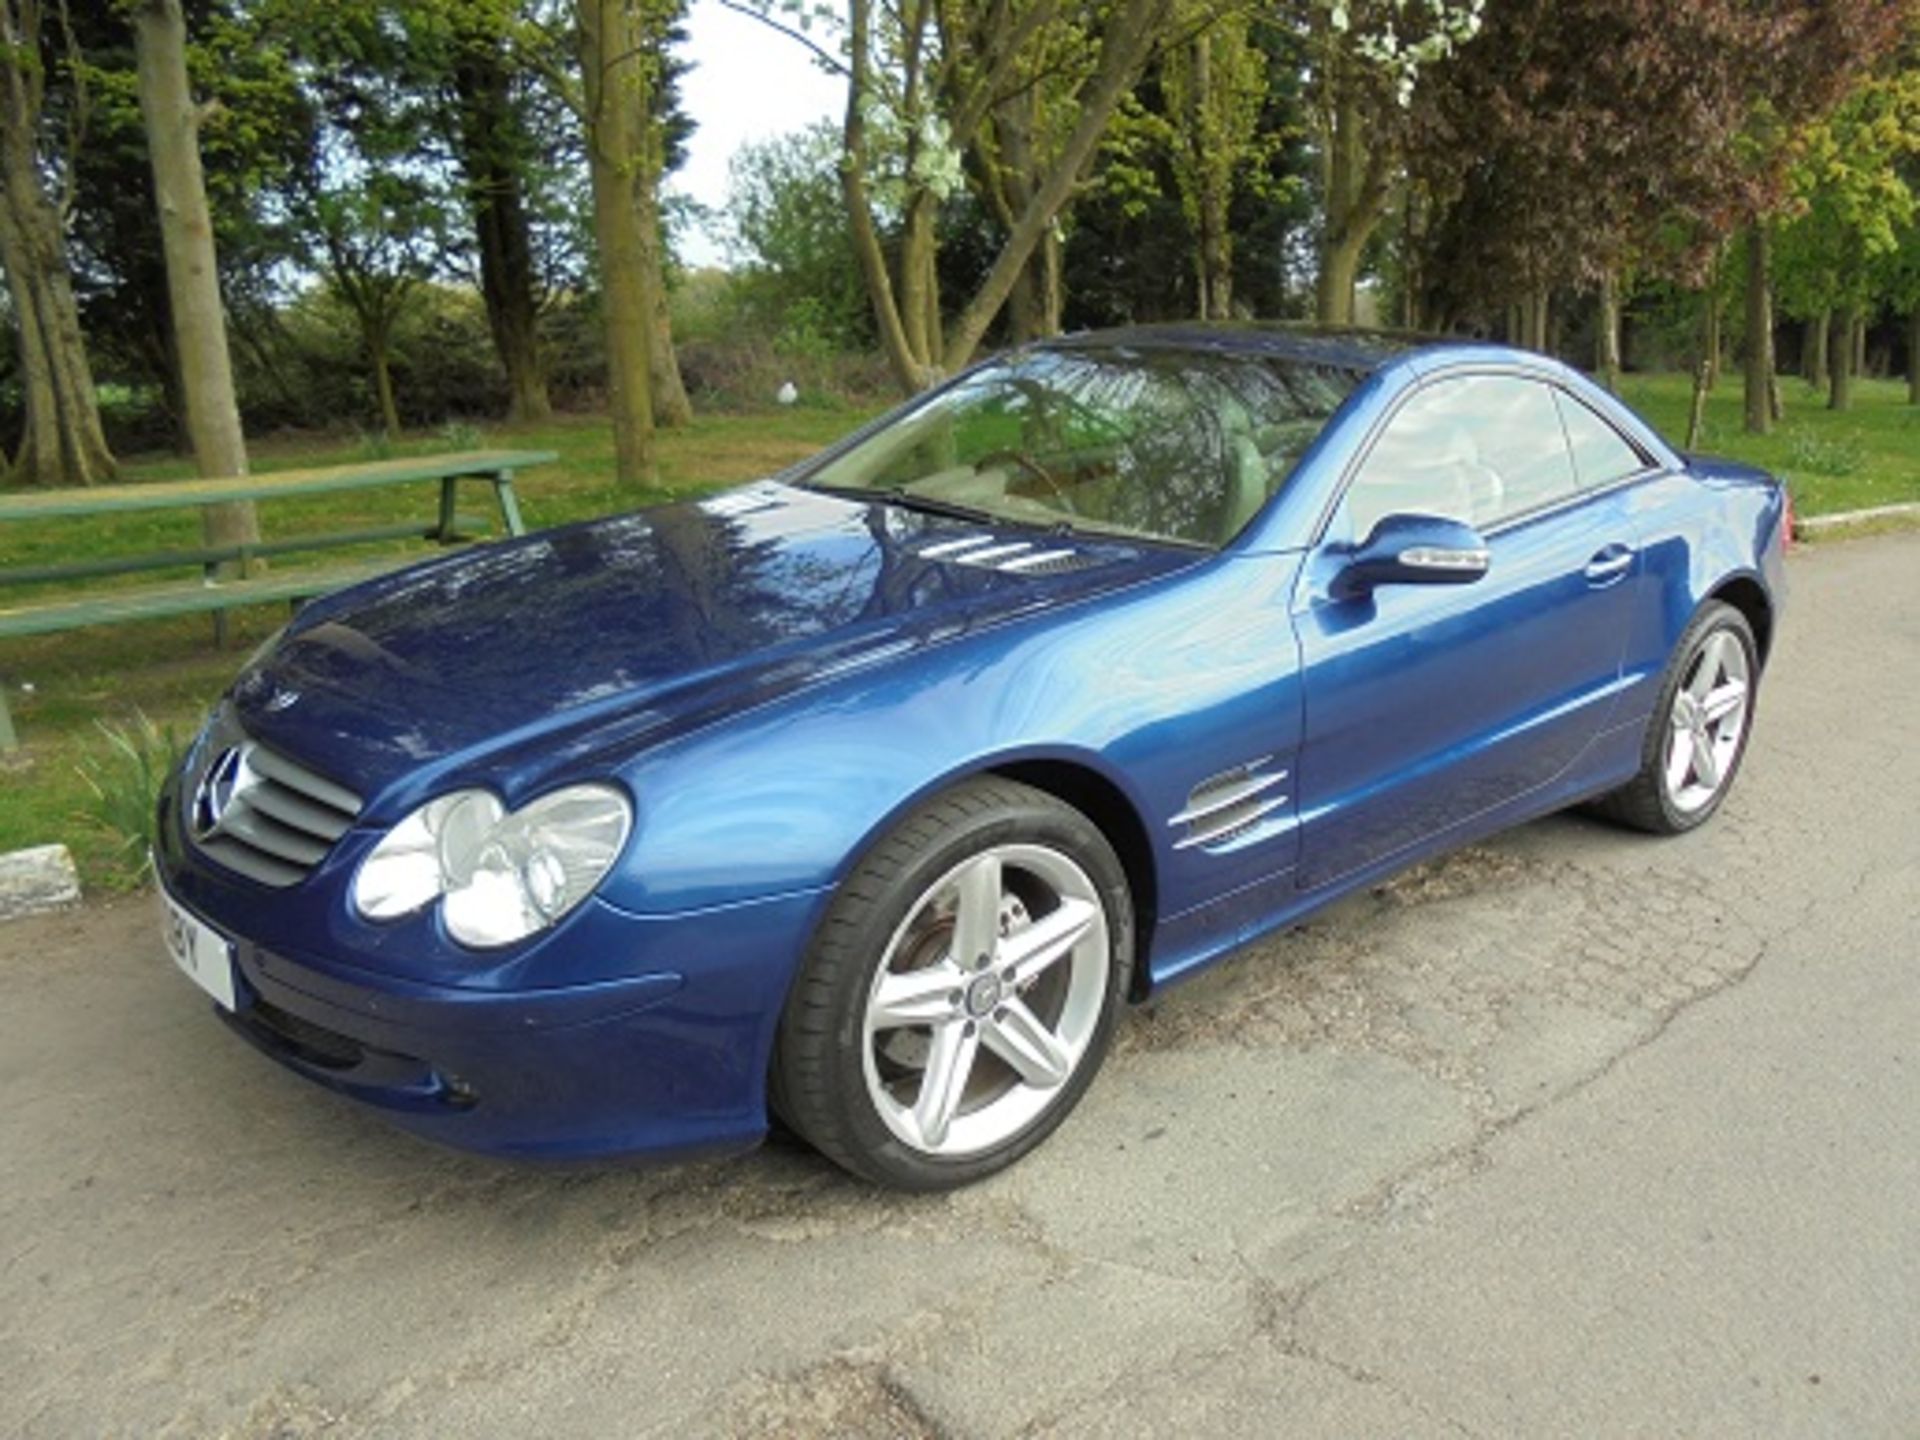 MERCEDES SL350 CONVERTIBLE WITH PRIVATE PLATE: L1OBY INCLUDED - Image 3 of 12